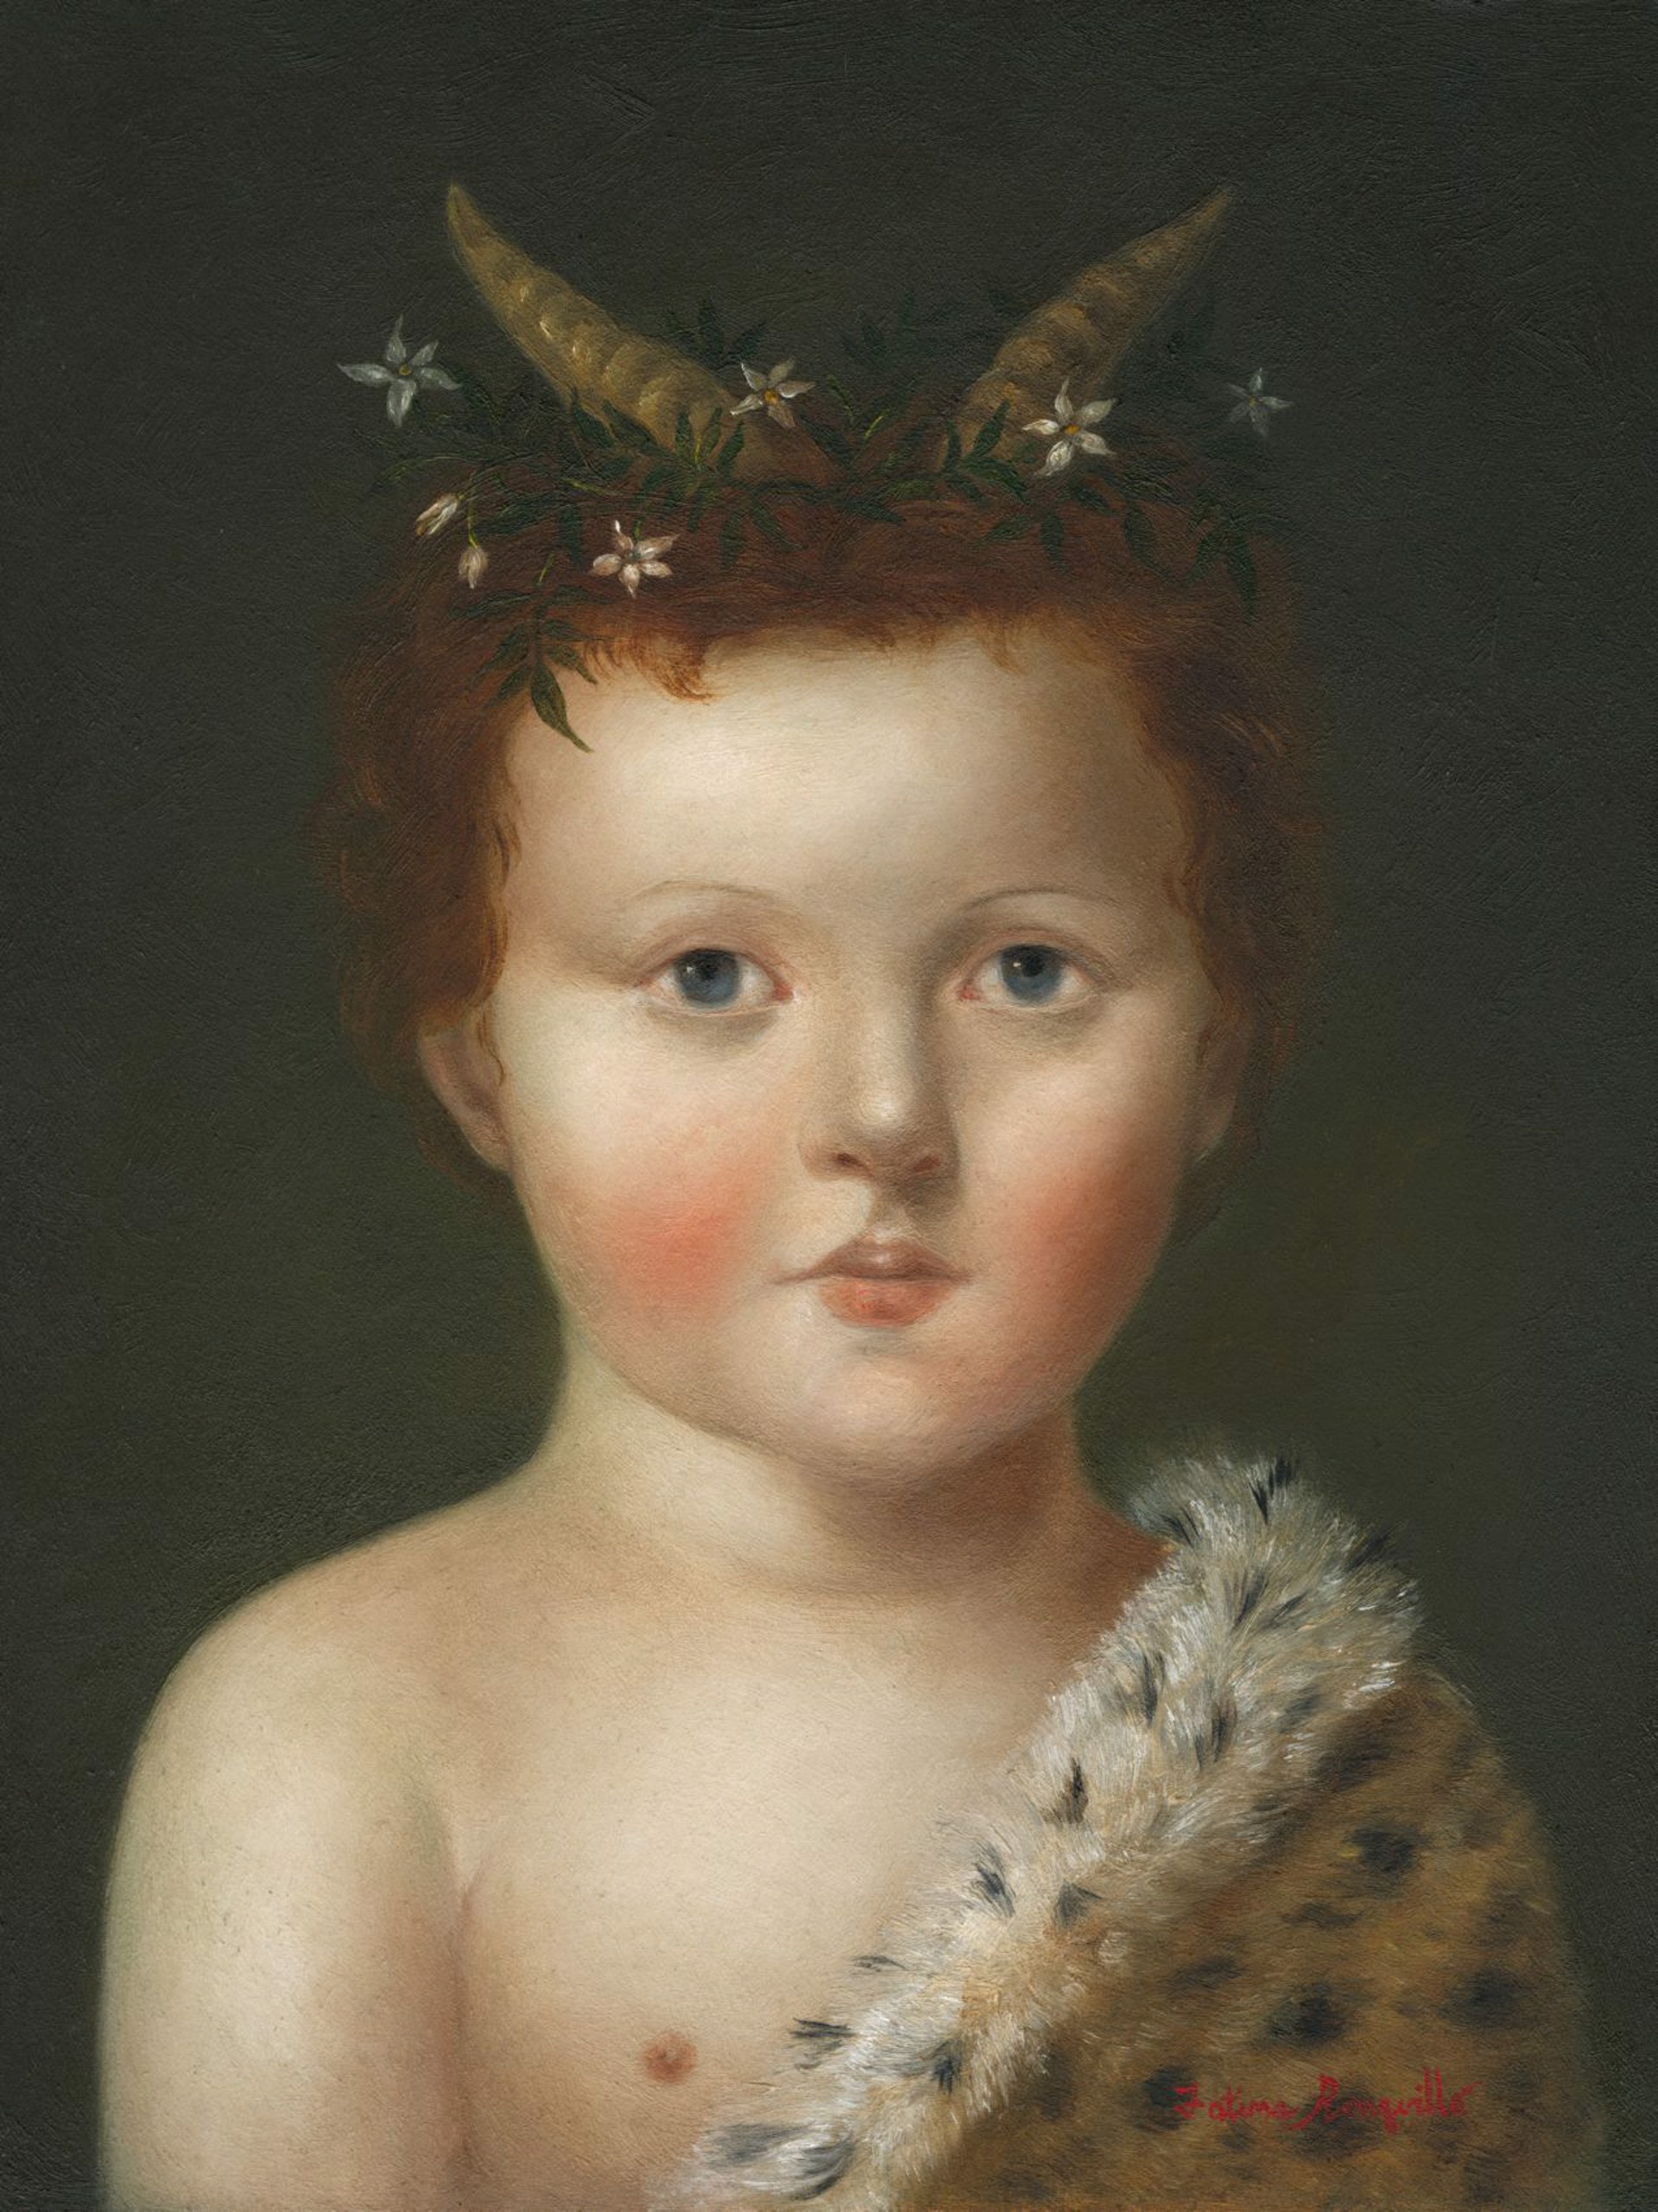 Little Faun by Fatima Ronquillo